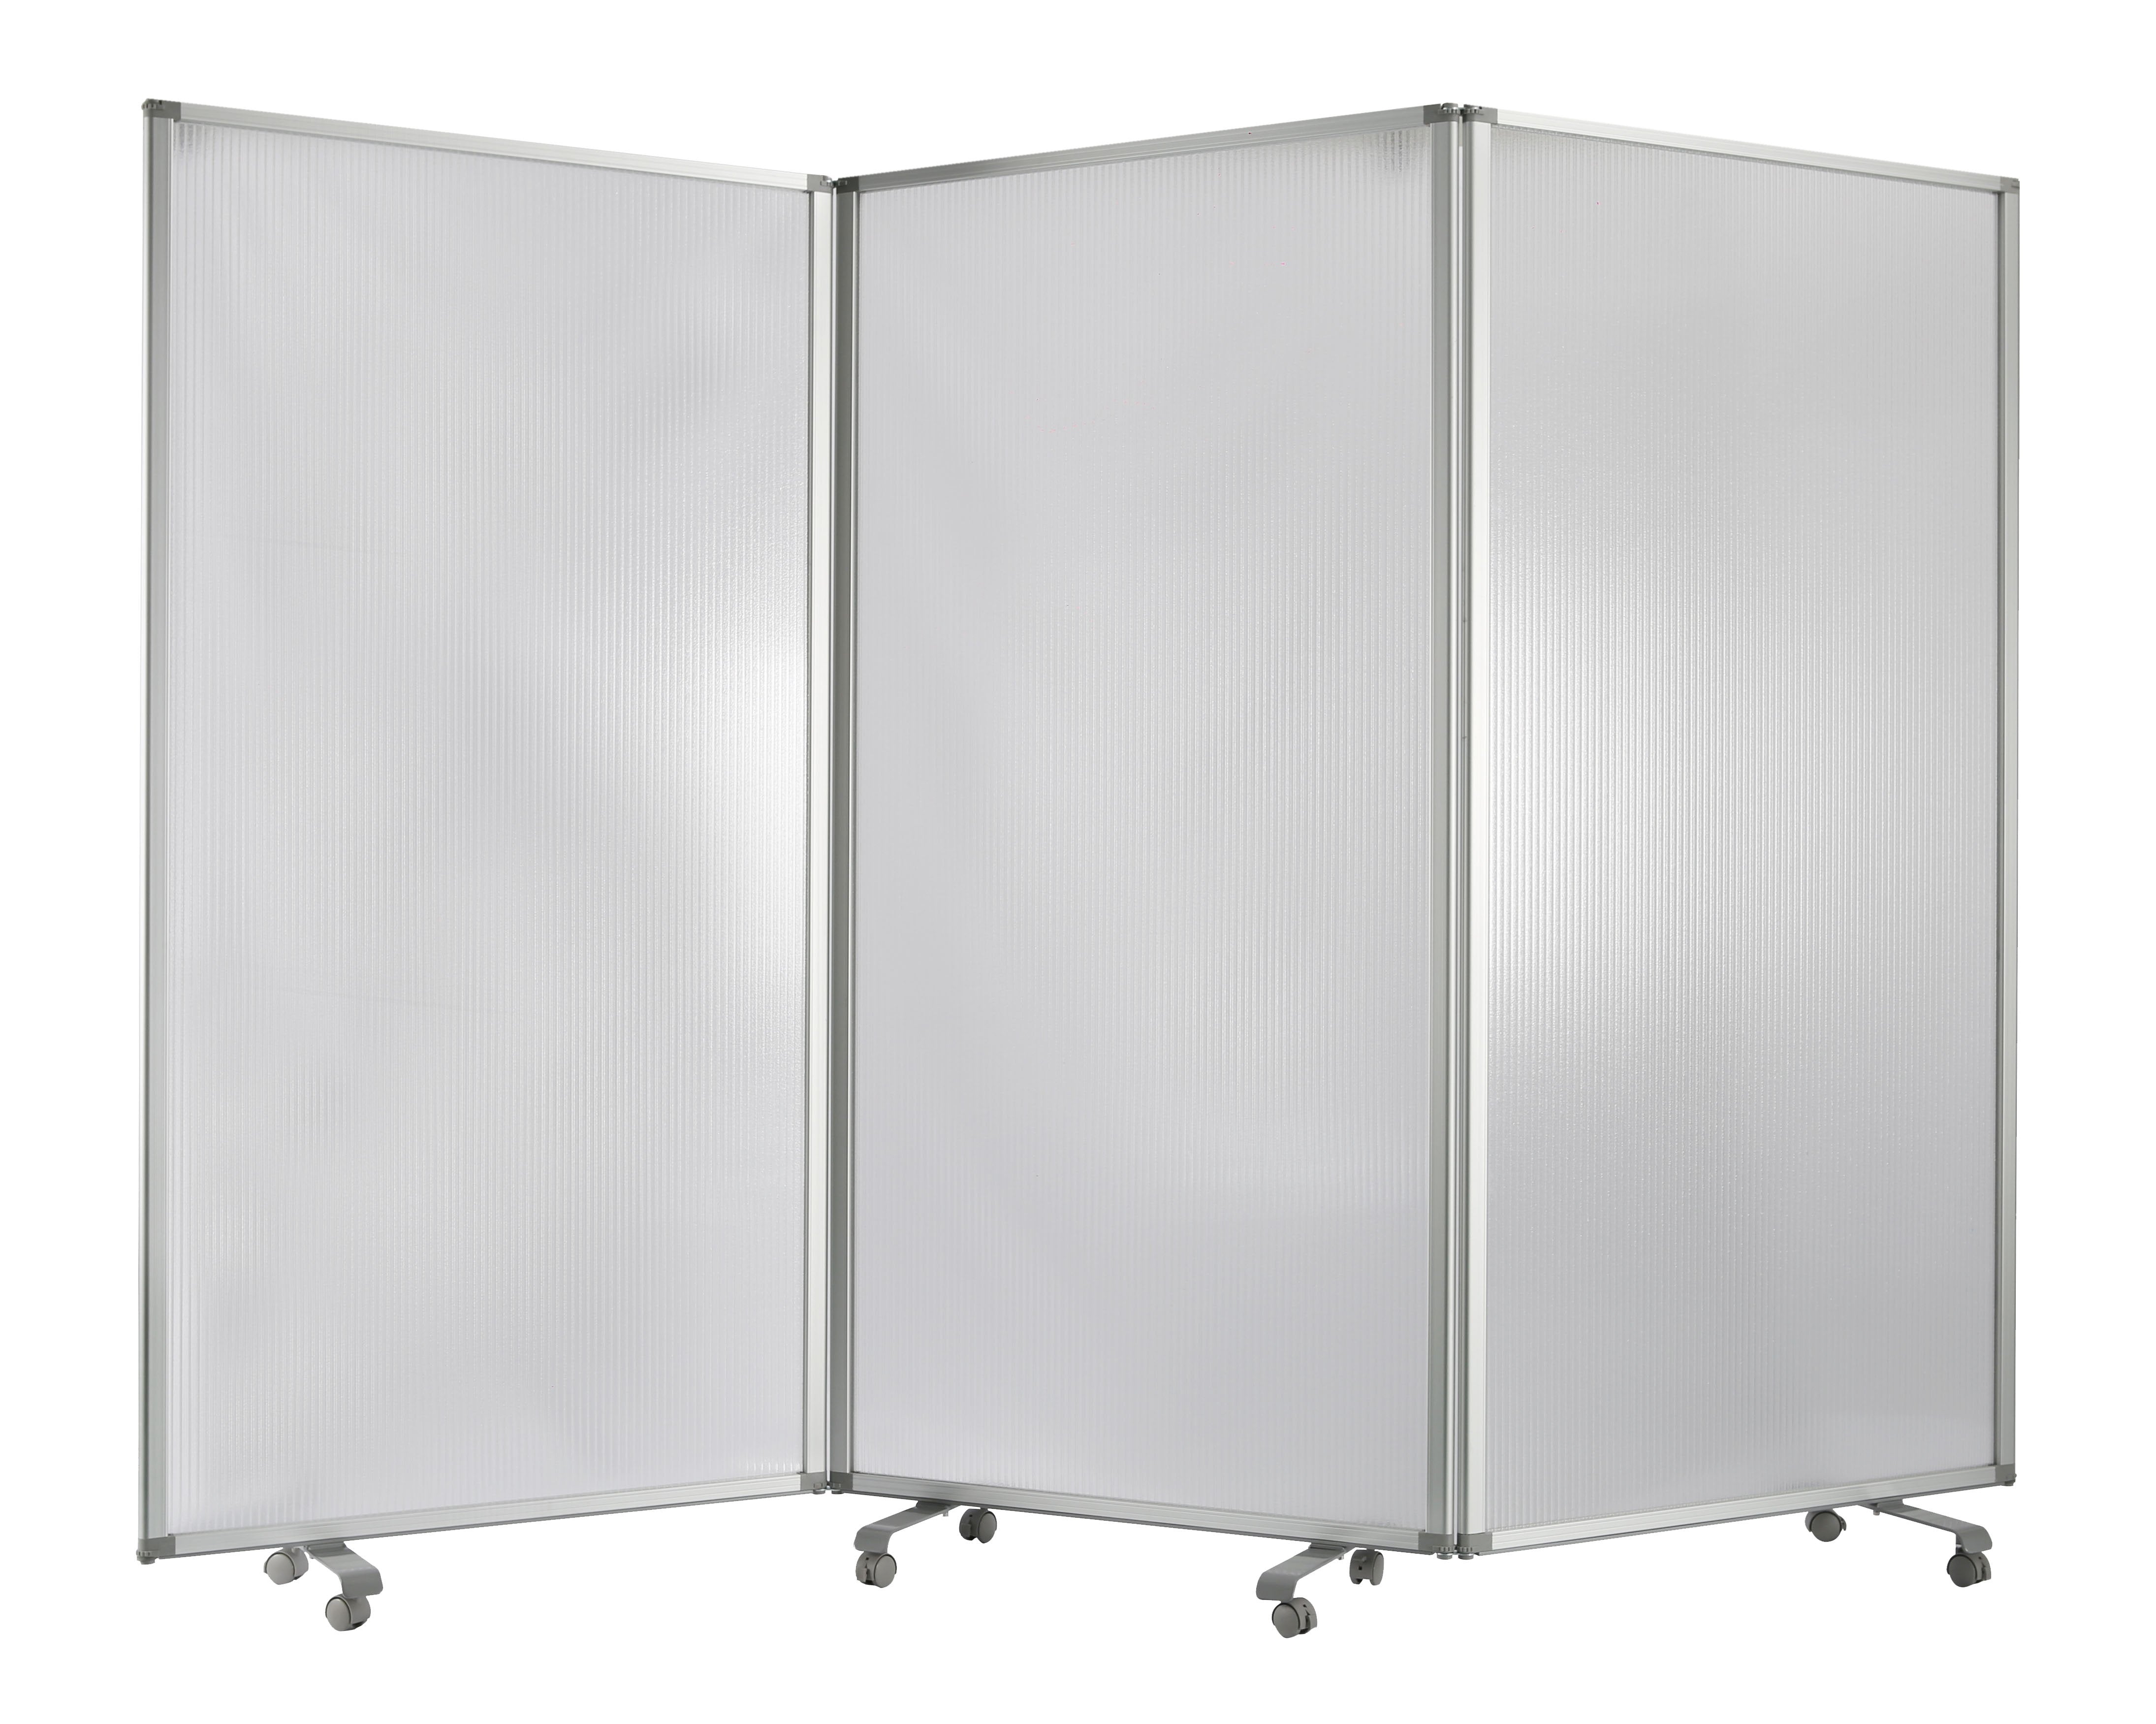 Benjara Accordion Style Plastic Inserts 3 Panel Room Divider with